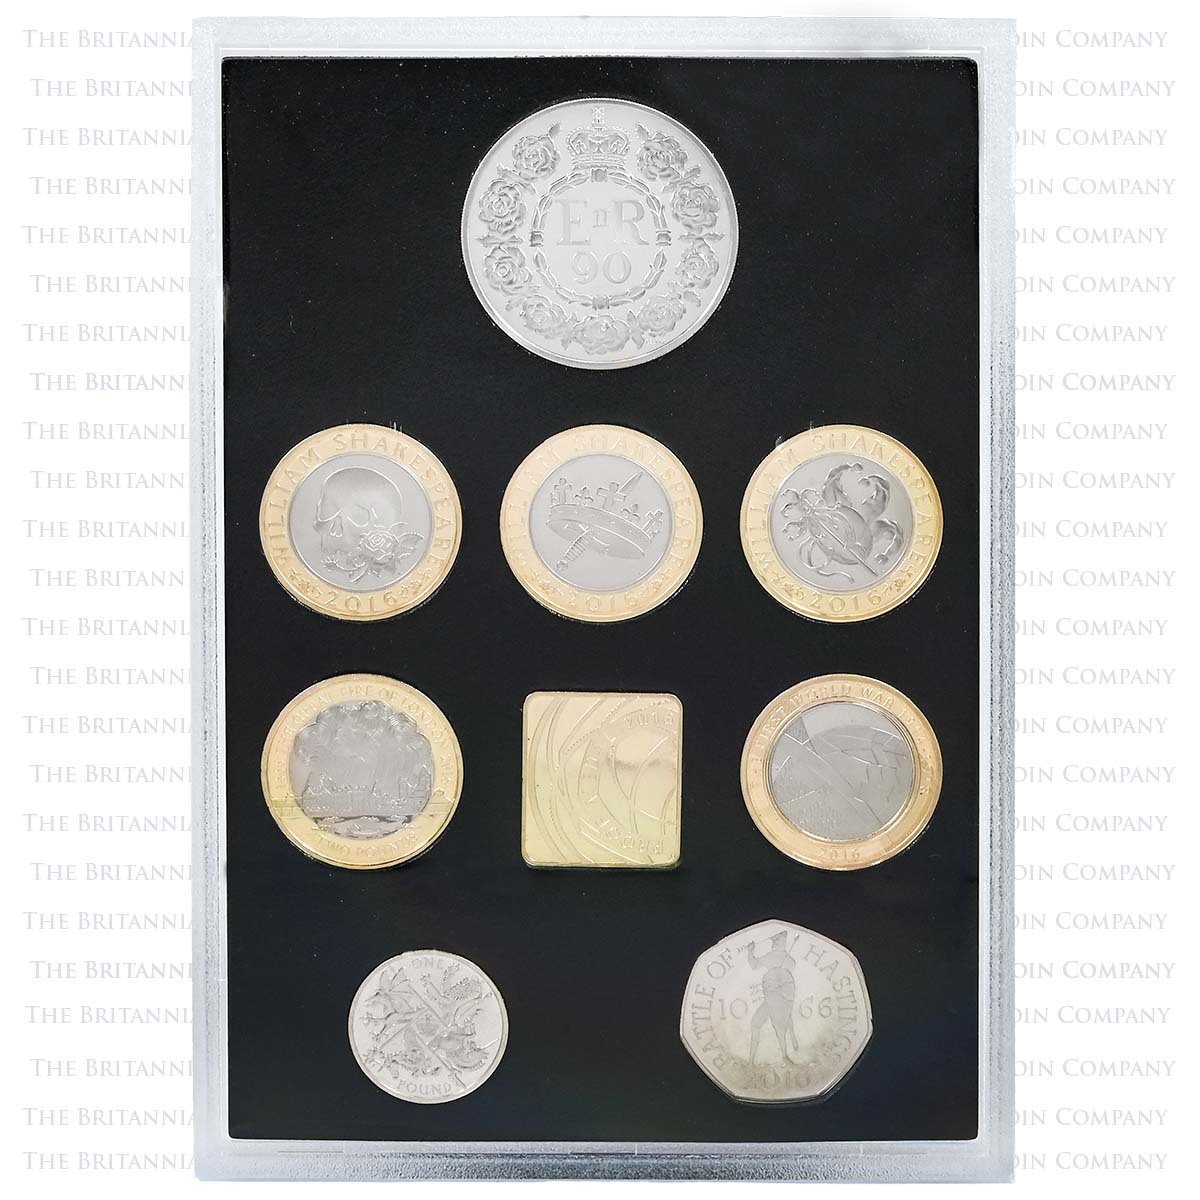 2016-proof-coin-set-collector-edtition-002-m